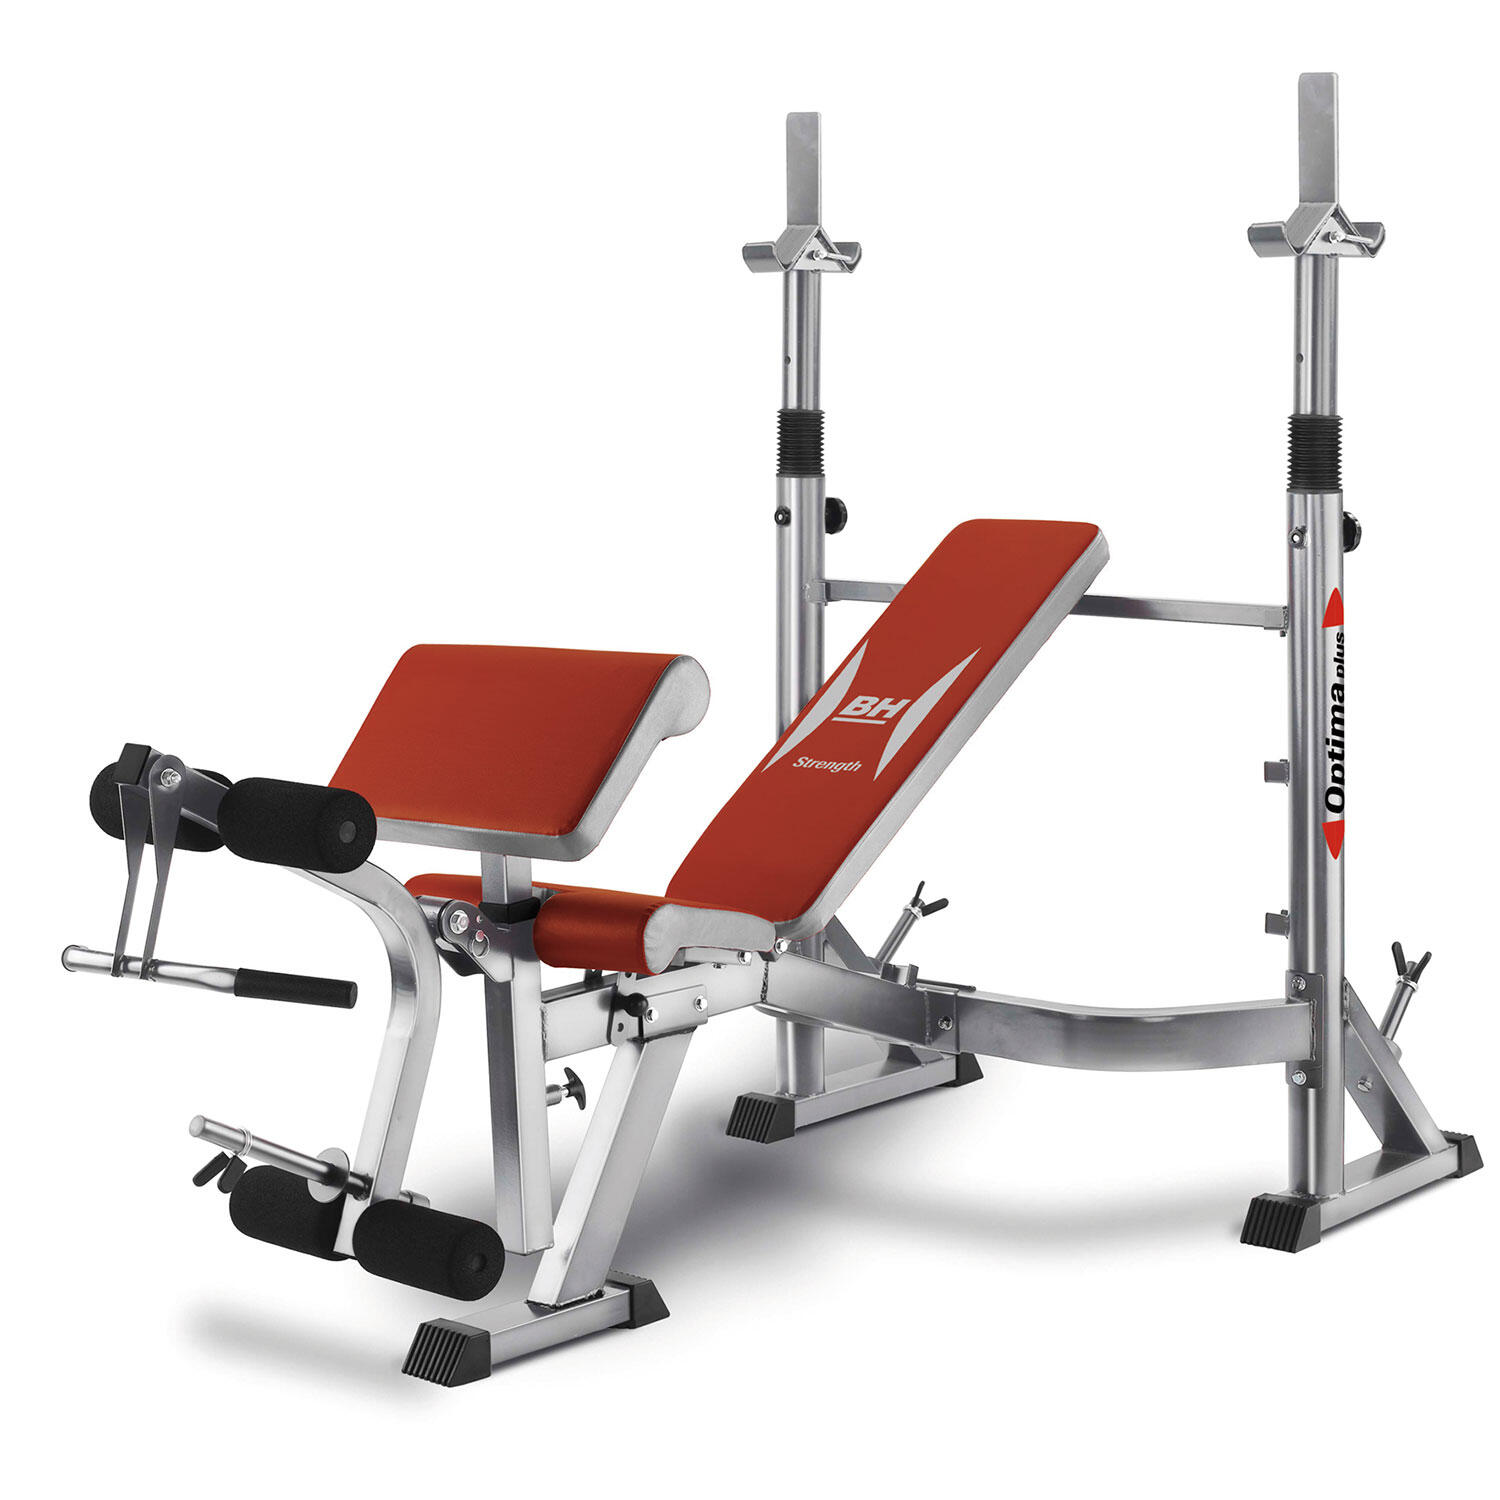 PROACTION BH FITNESS OPTIMA PRESS G330 WEIGHT BENCH WITH REAR SQUAT RACK